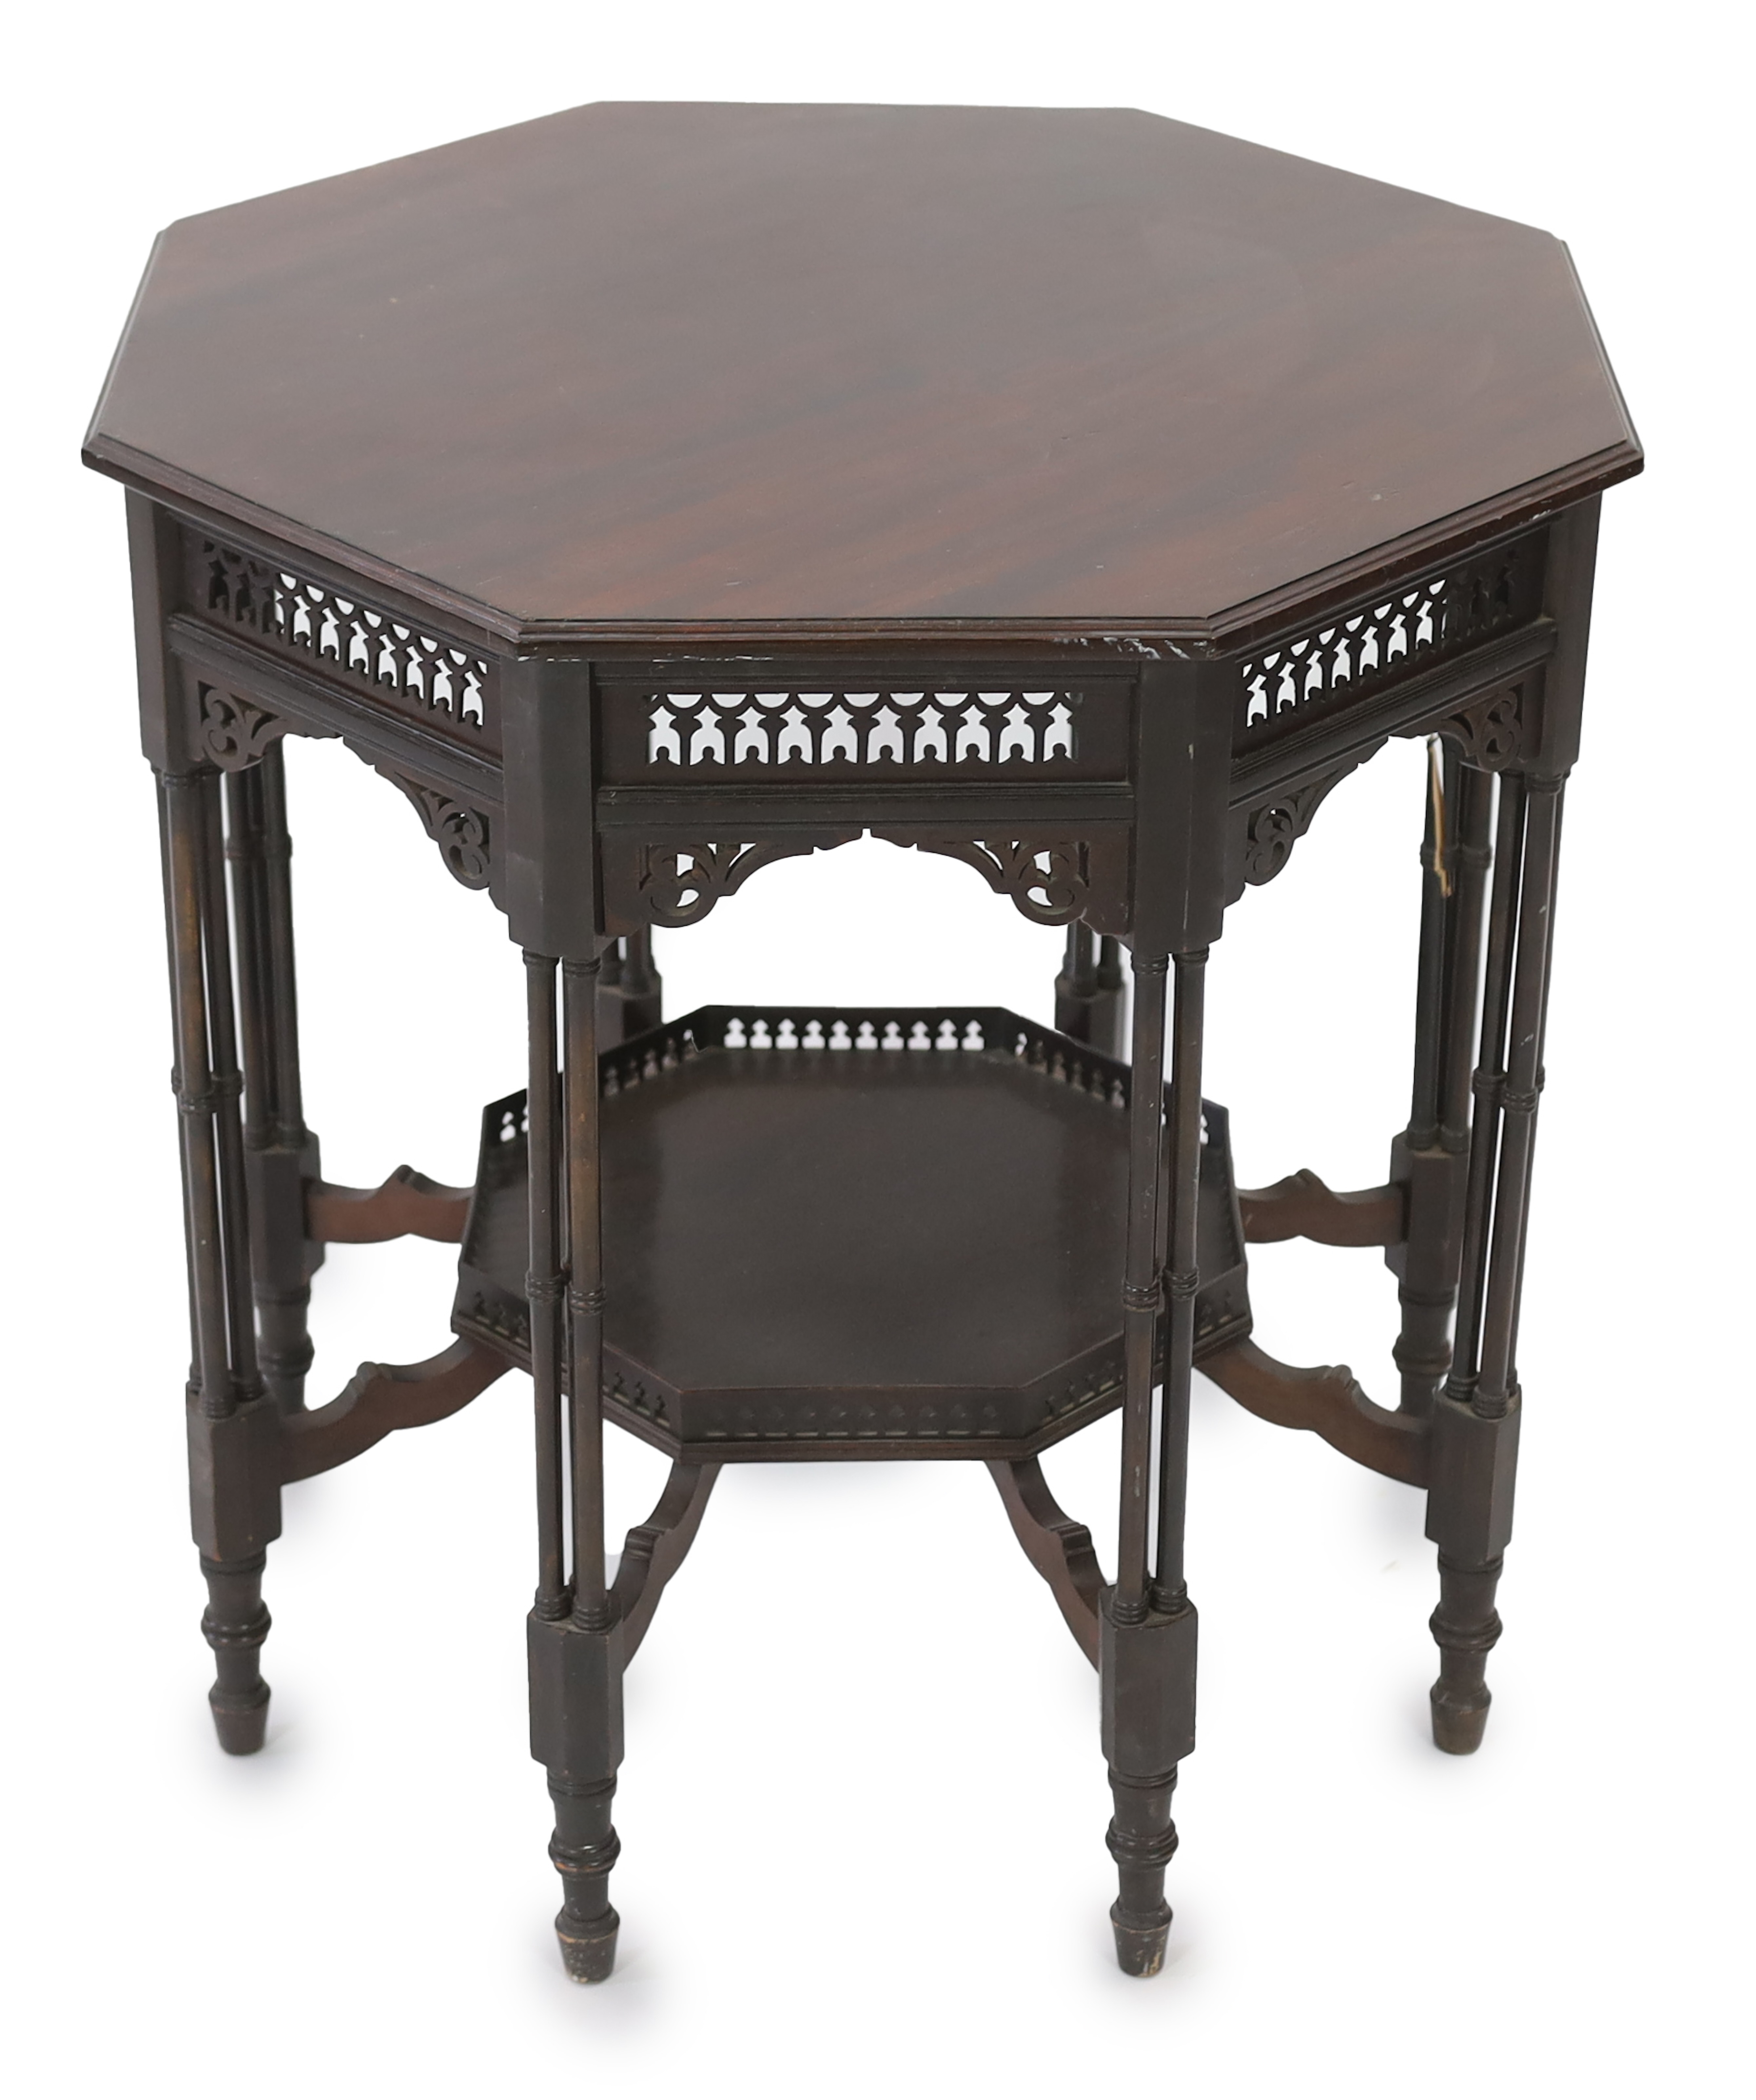 Royal Furniture: A late Victorian ebonised mahogany occasional table